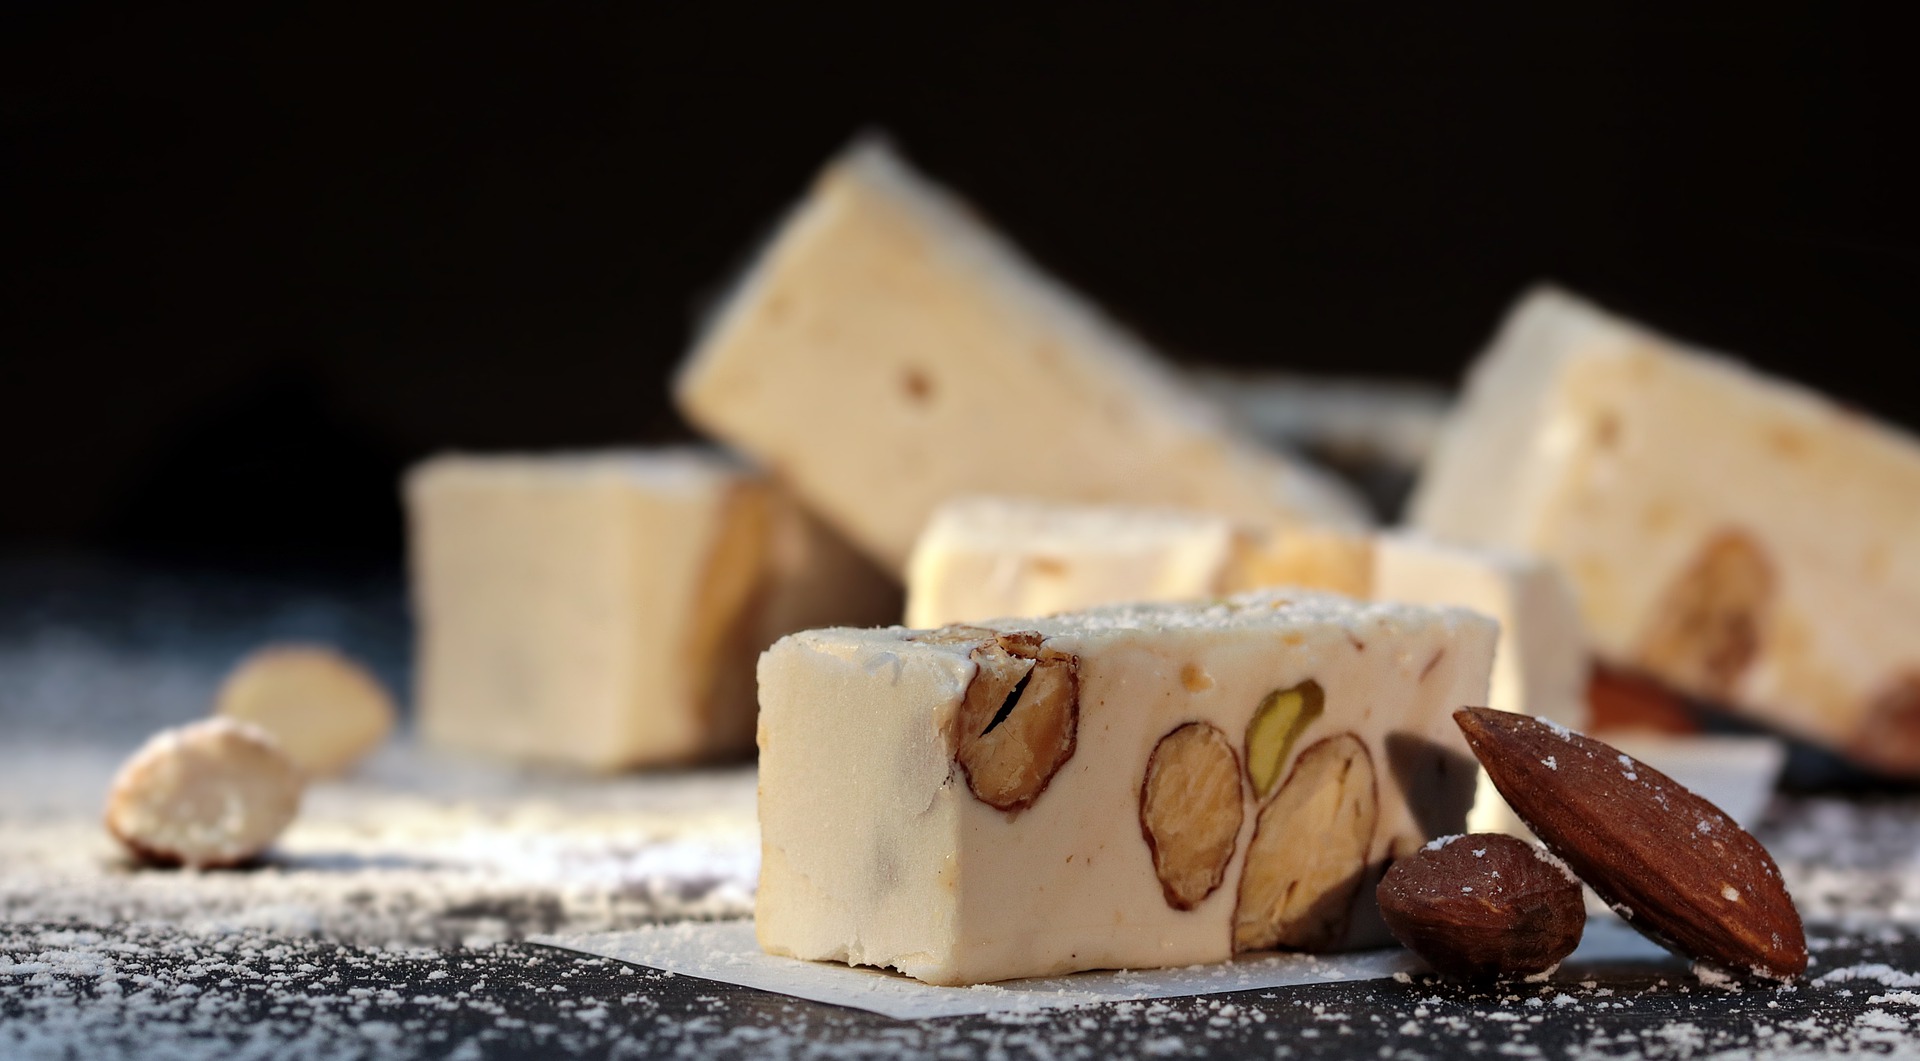 Discover the sweet history of nougat